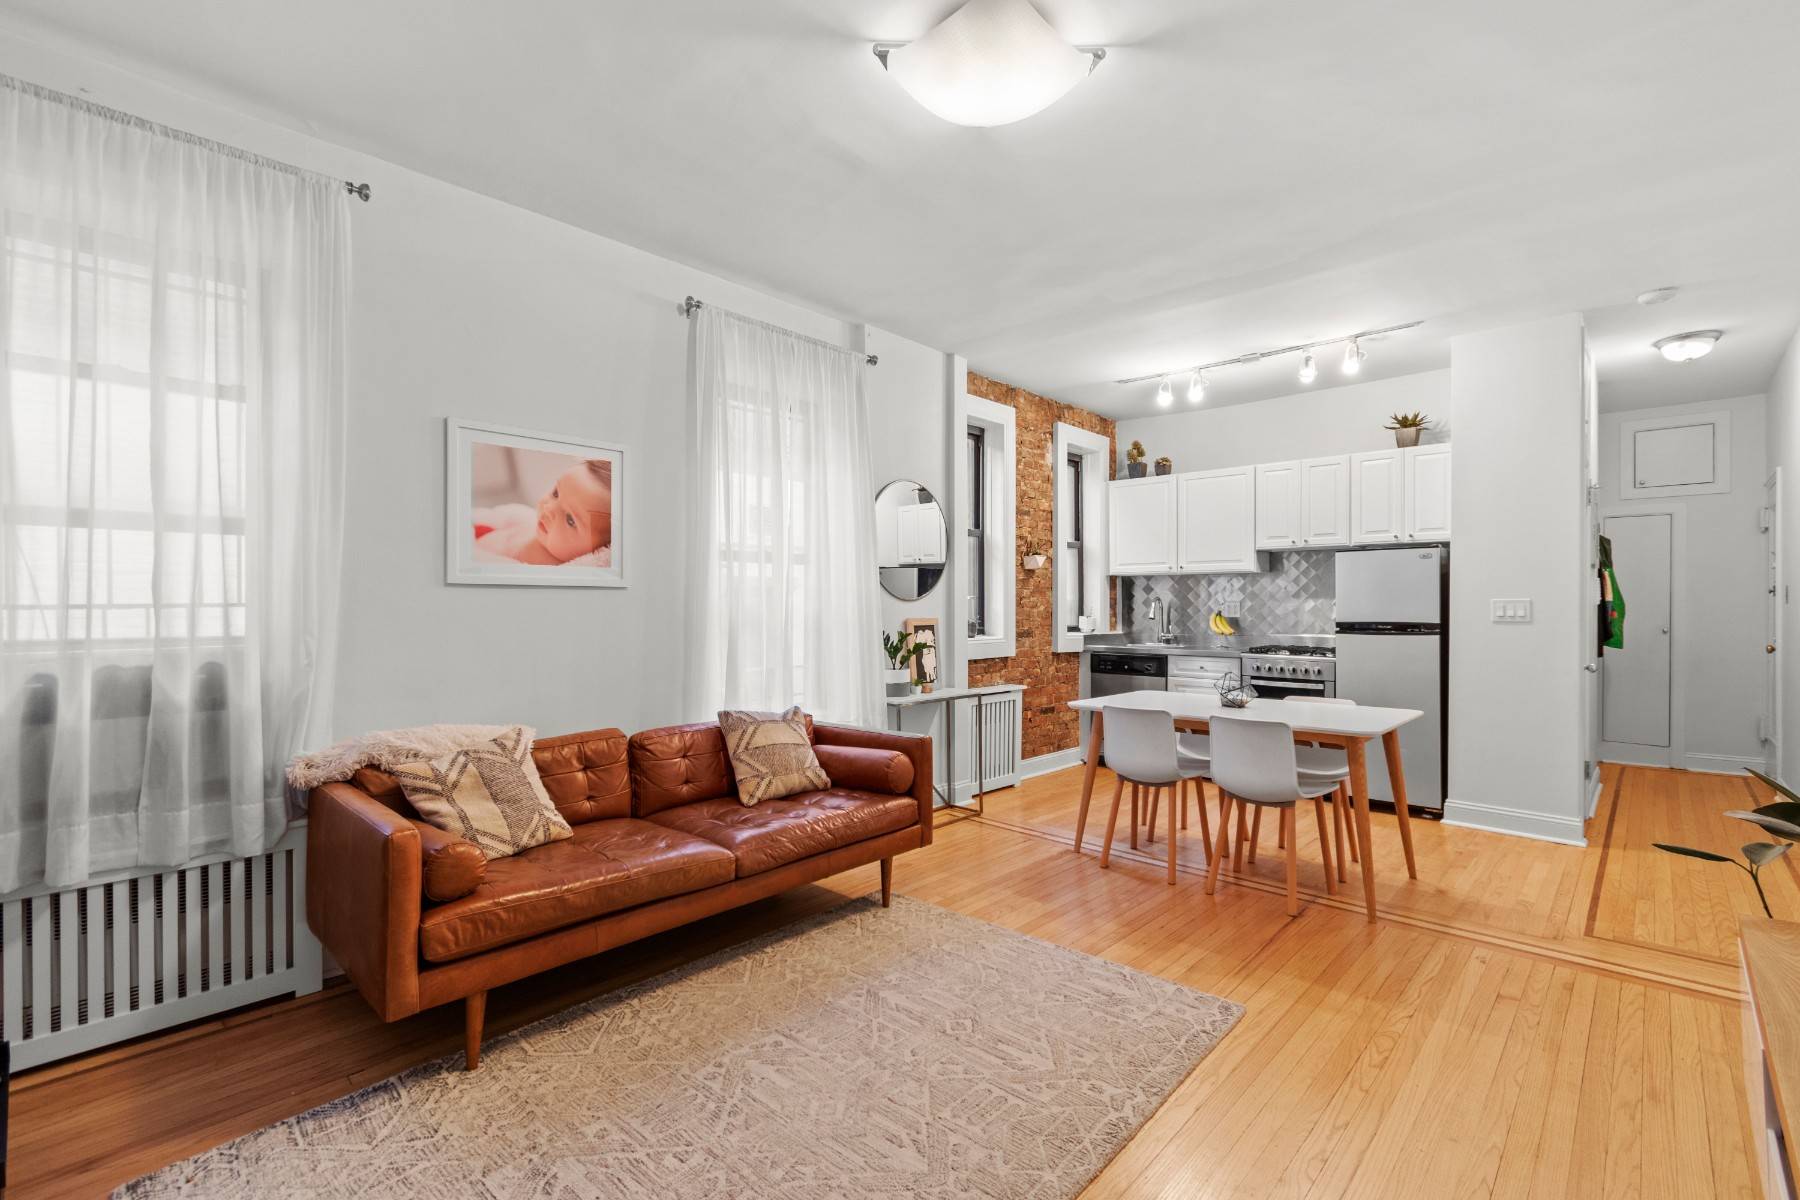 Welcome to 233 Park Place Apartment 18, this renovated 2 bedroom gem located in the heart of Prospect Heights is just what you have been searching for.